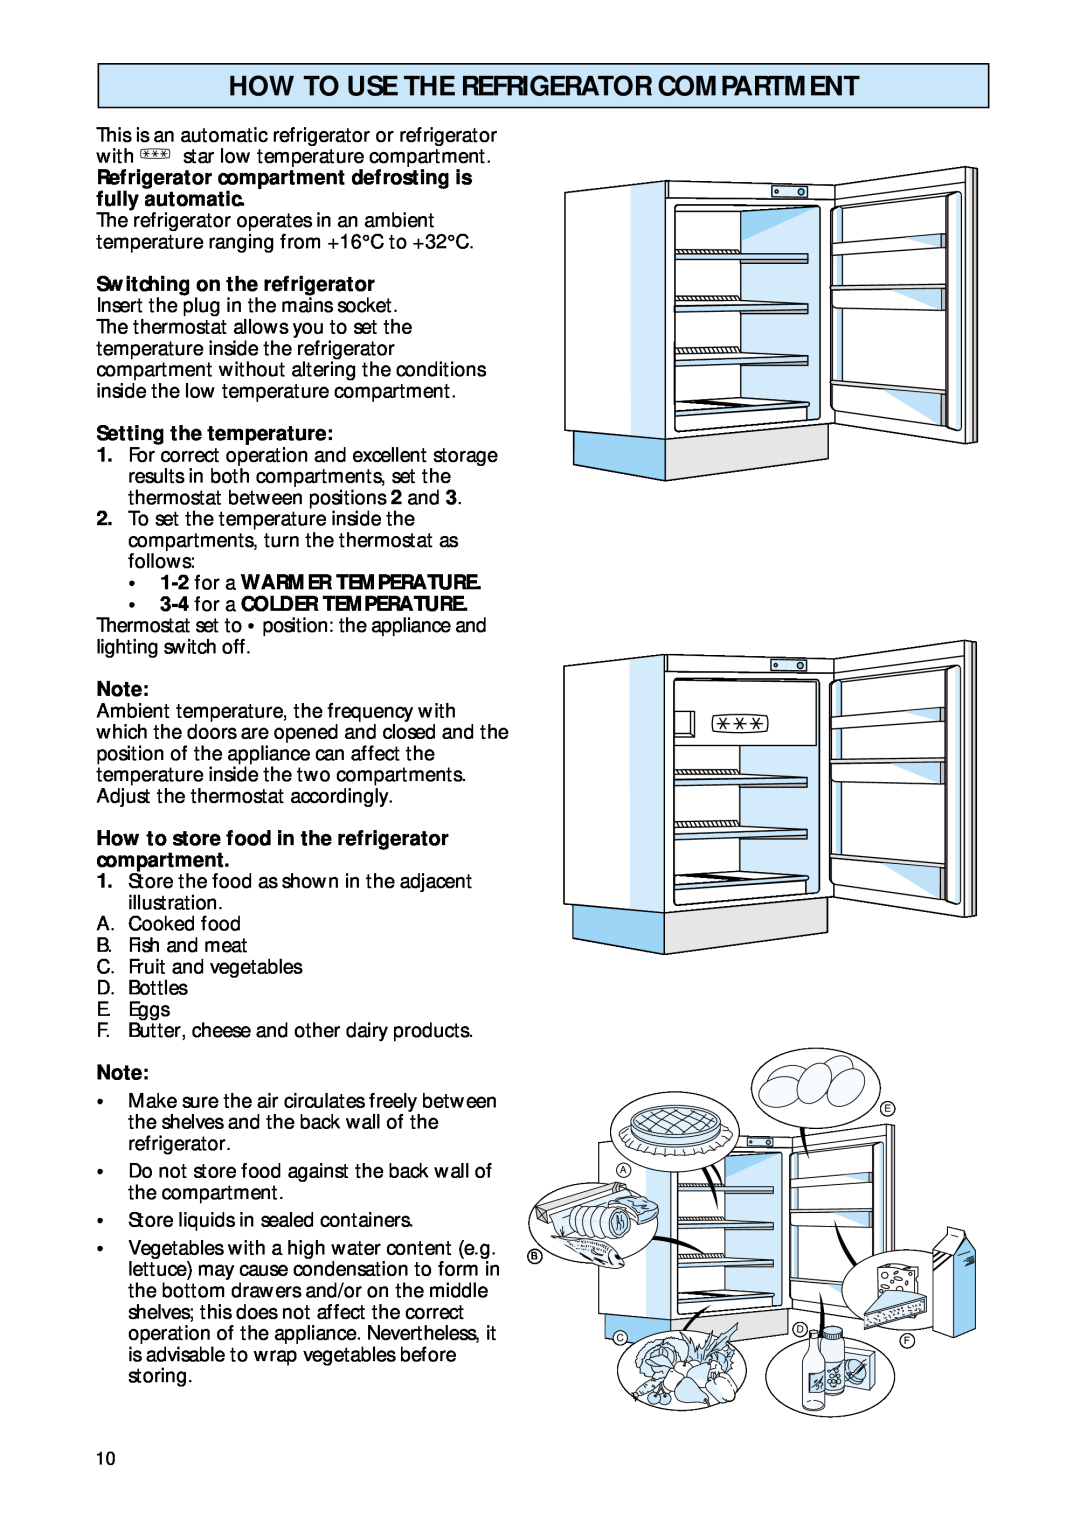 Smeg FR148A Refrigerator compartment defrosting is fully automatic, Setting the temperature, for a WARMER TEMPERATURE 